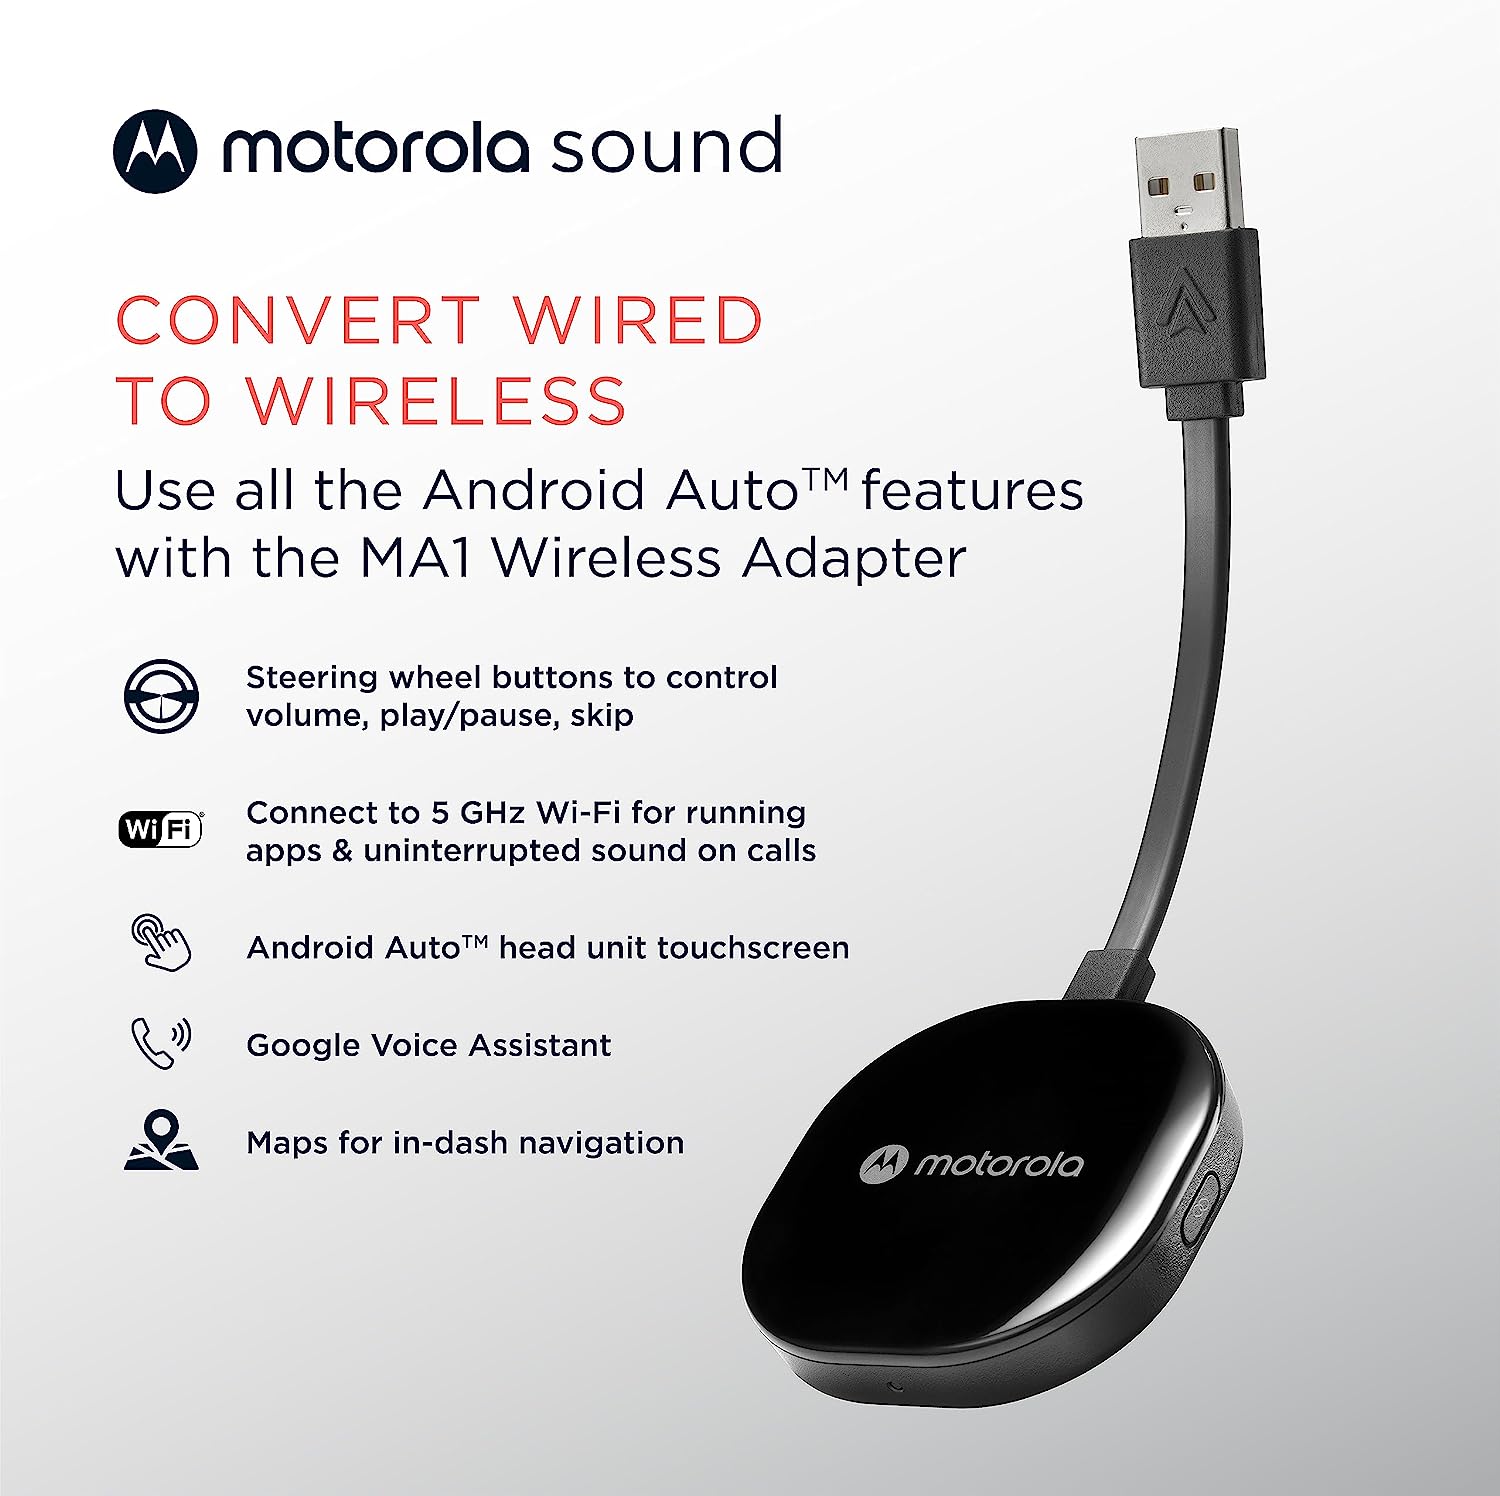 Motorola MA1 wireless Android Auto adapter announced for the